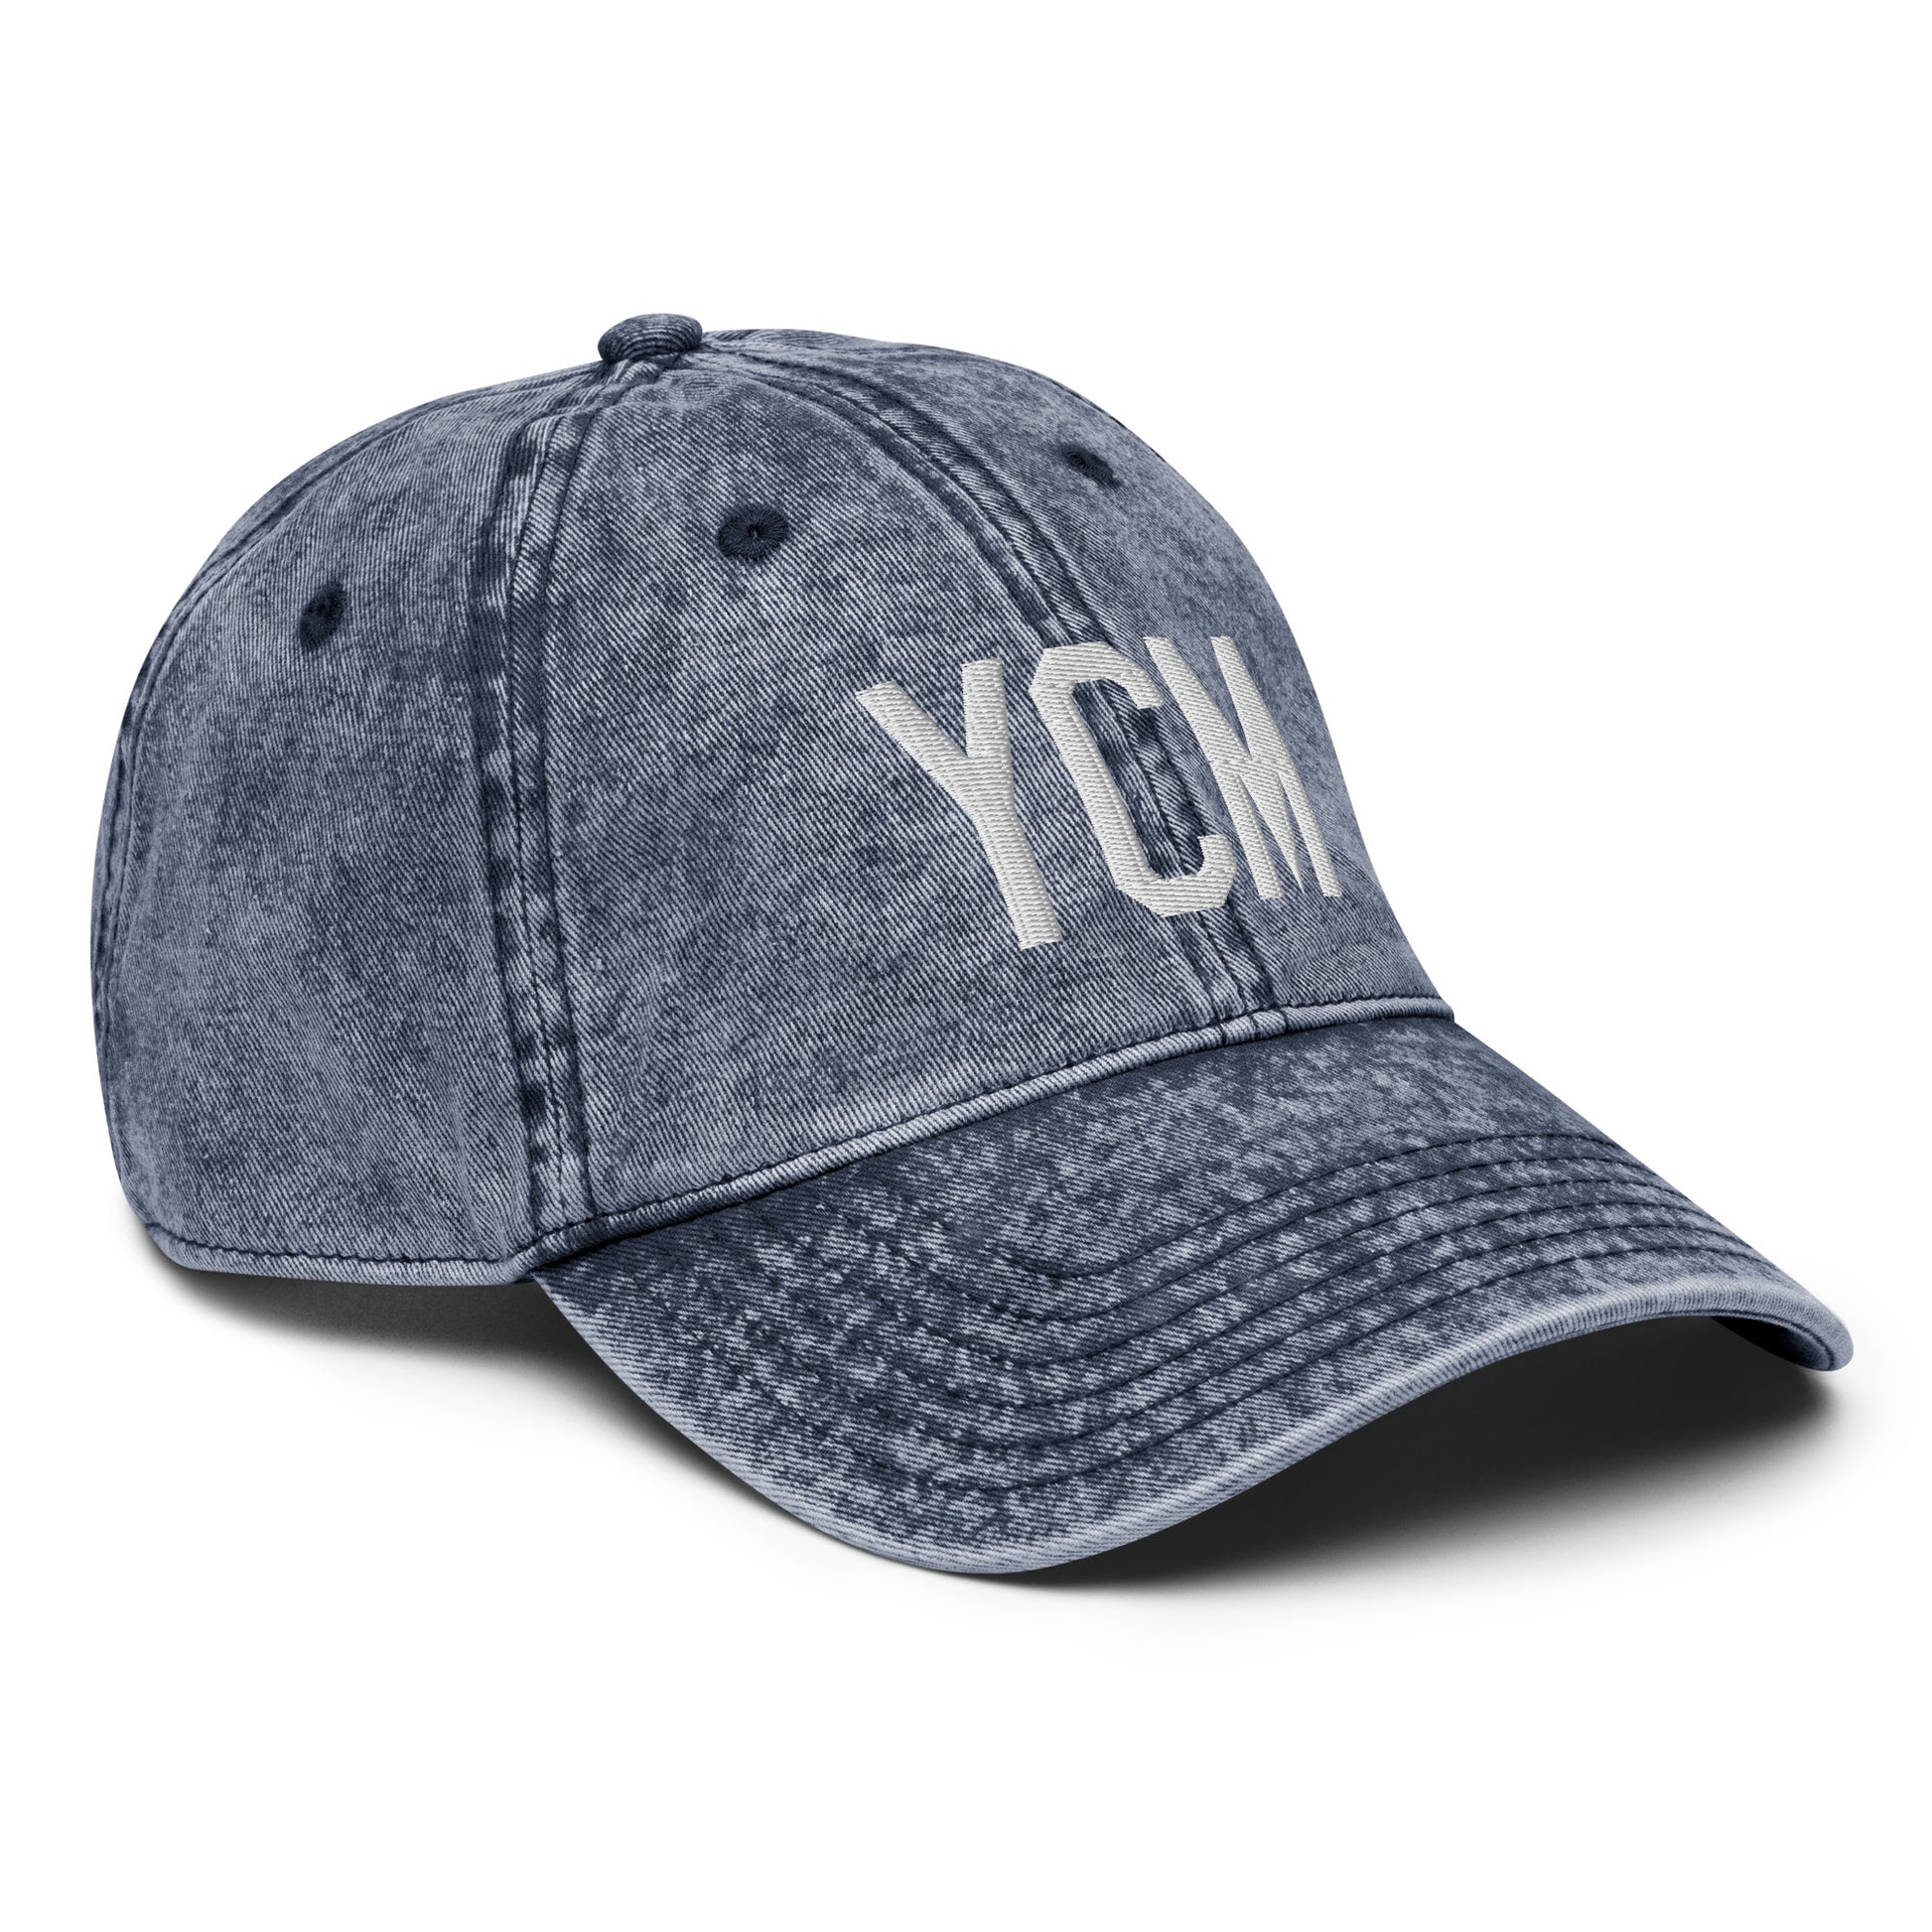 Airport Code Twill Cap - White • YCM St. Catharines • YHM Designs - Image 18